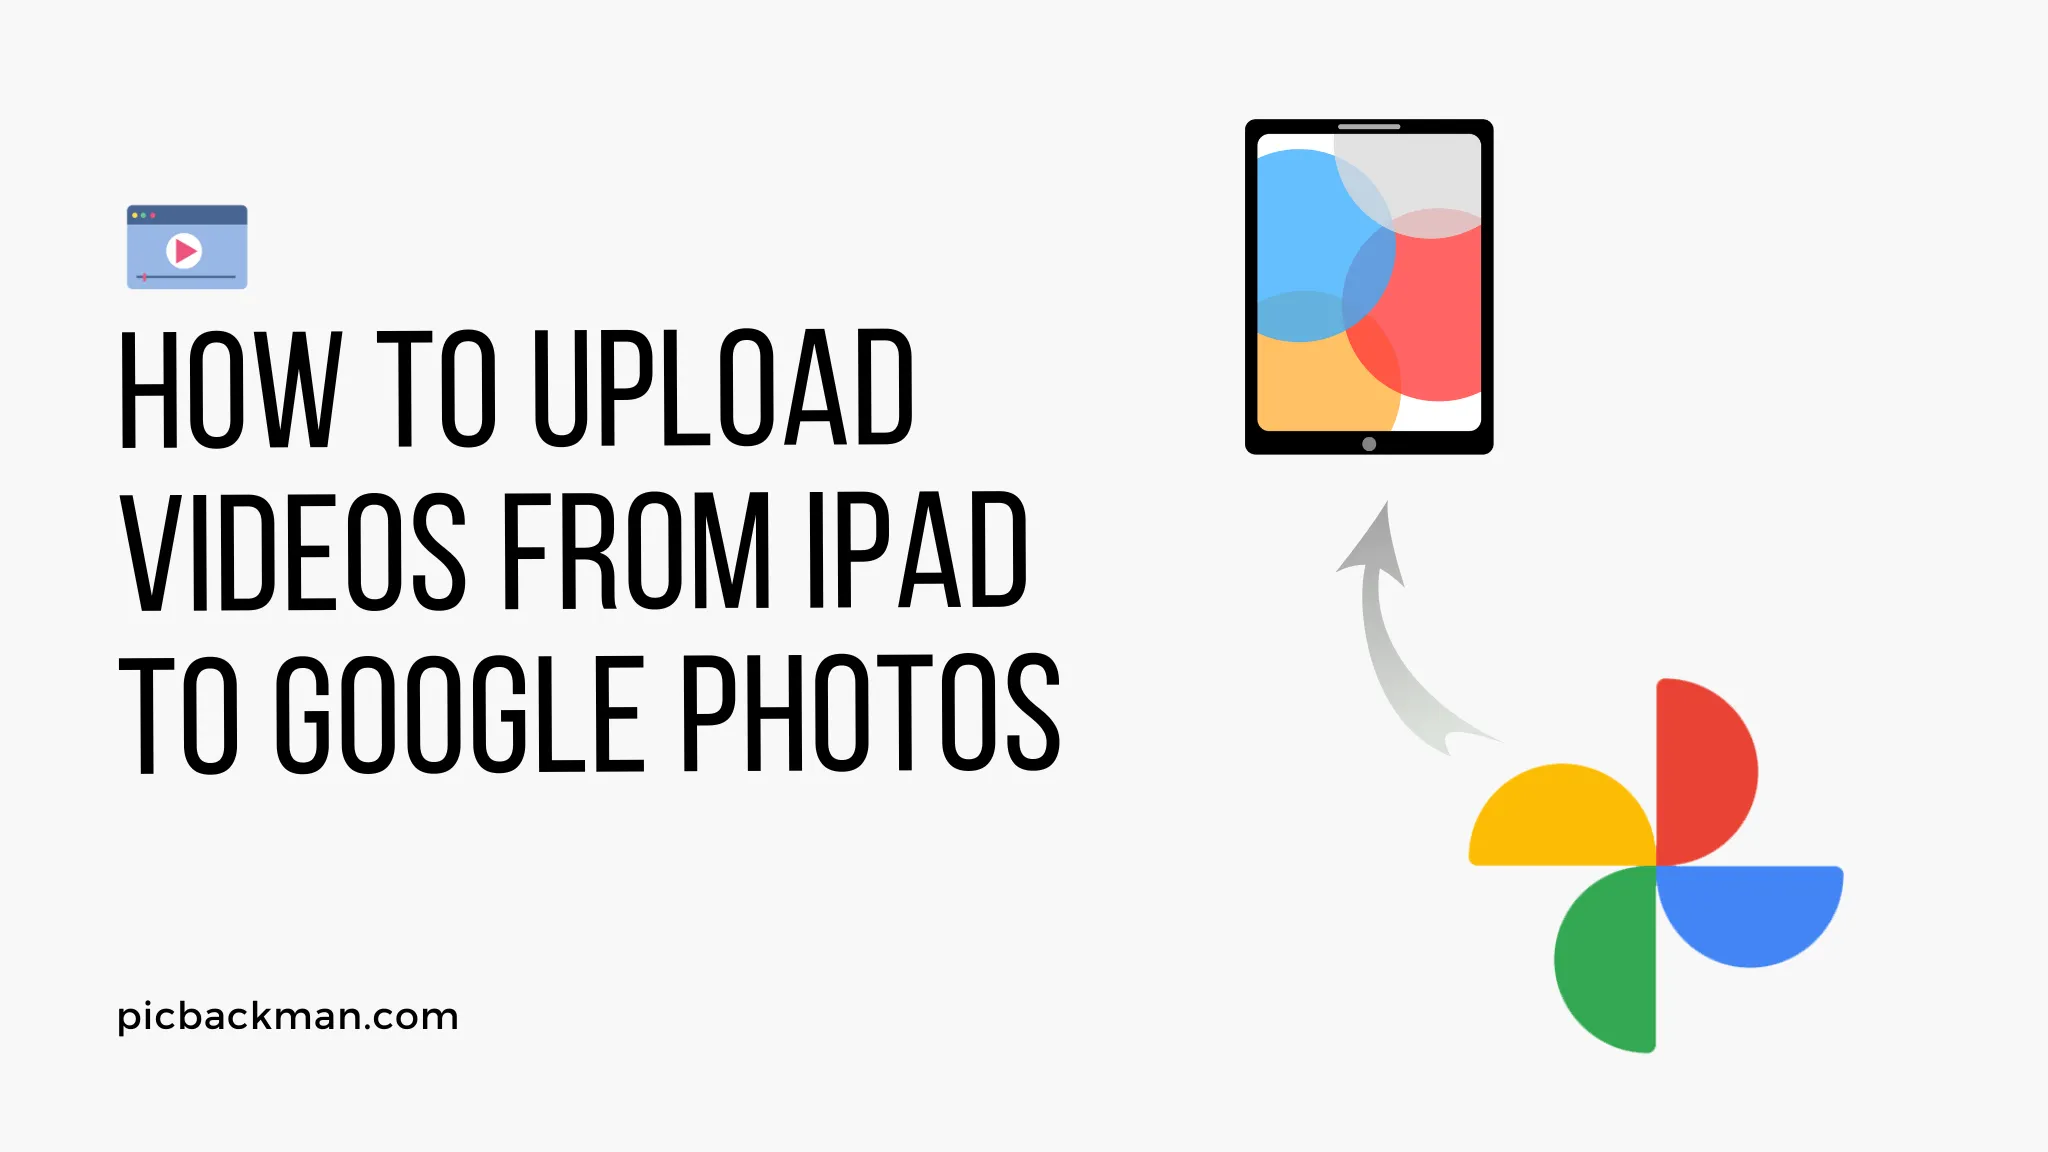 How to Upload Videos from iPad to Google Photos